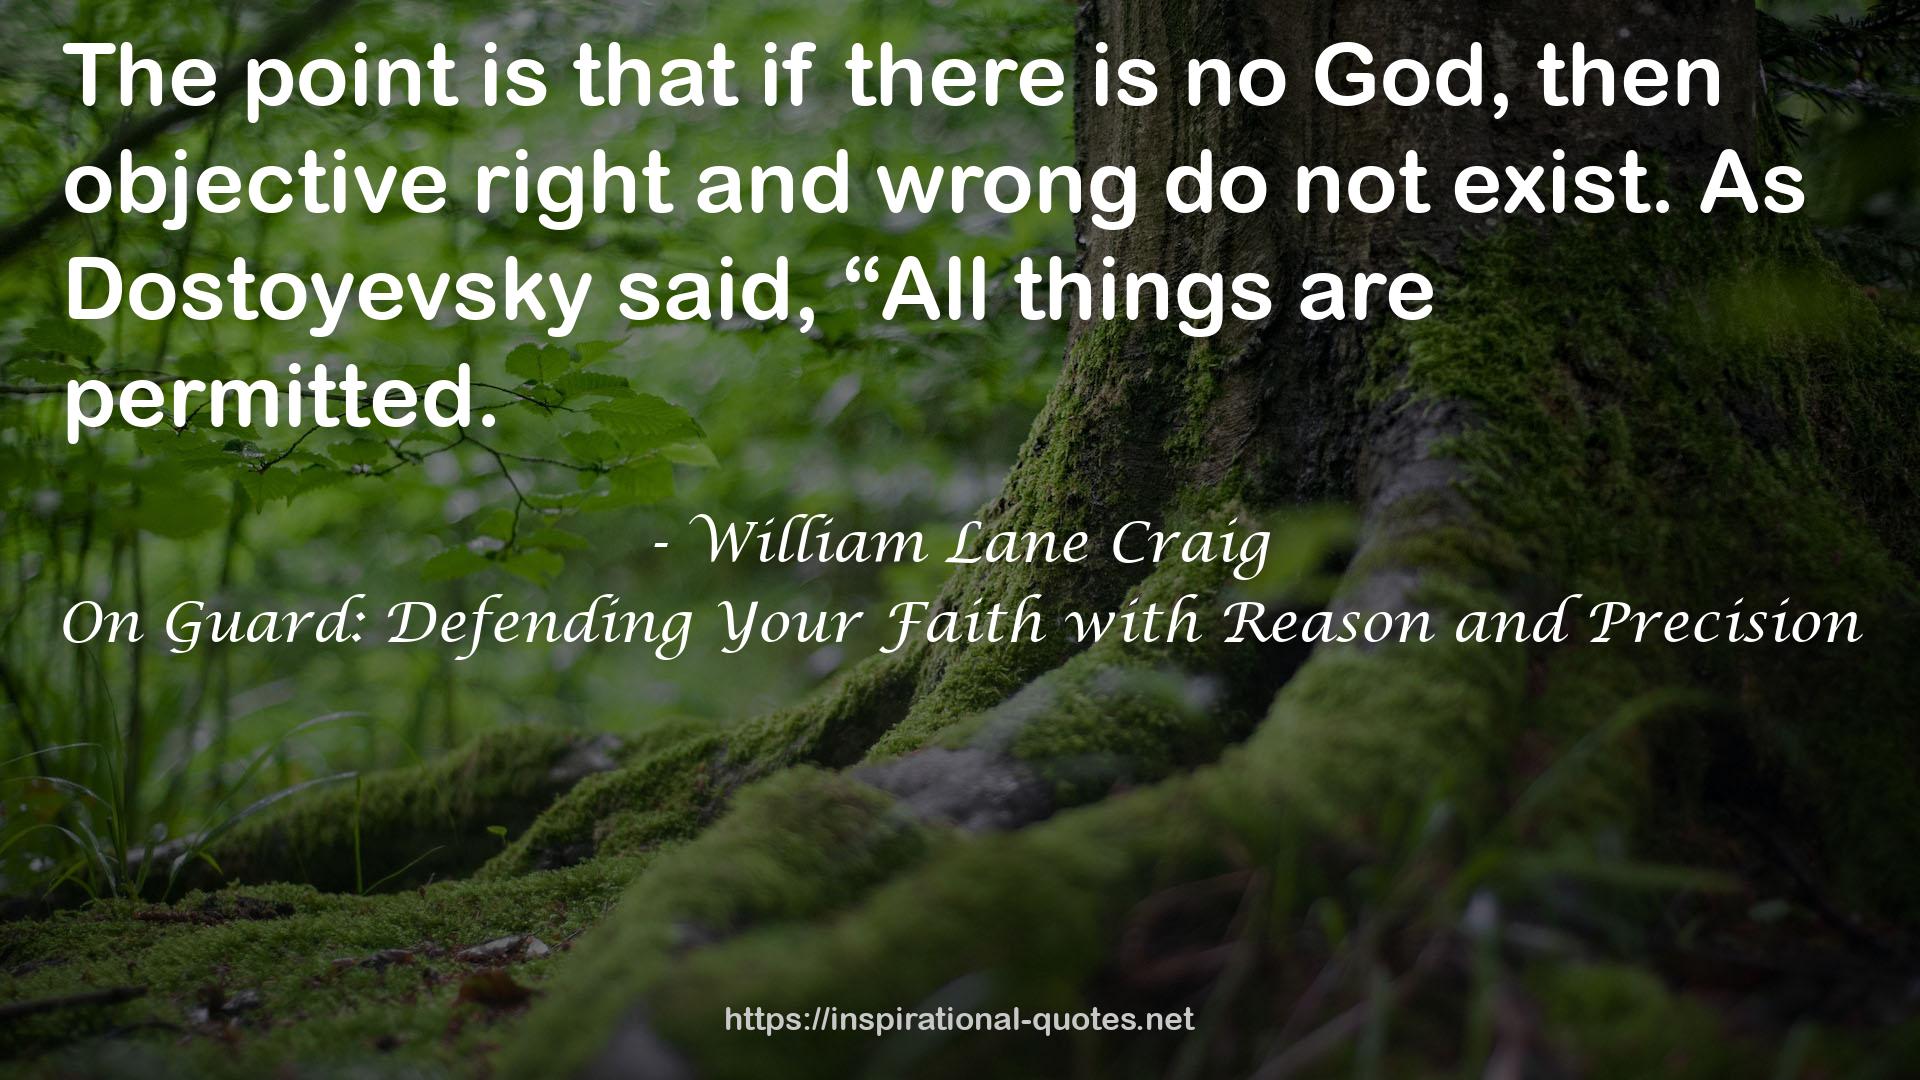 On Guard: Defending Your Faith with Reason and Precision QUOTES